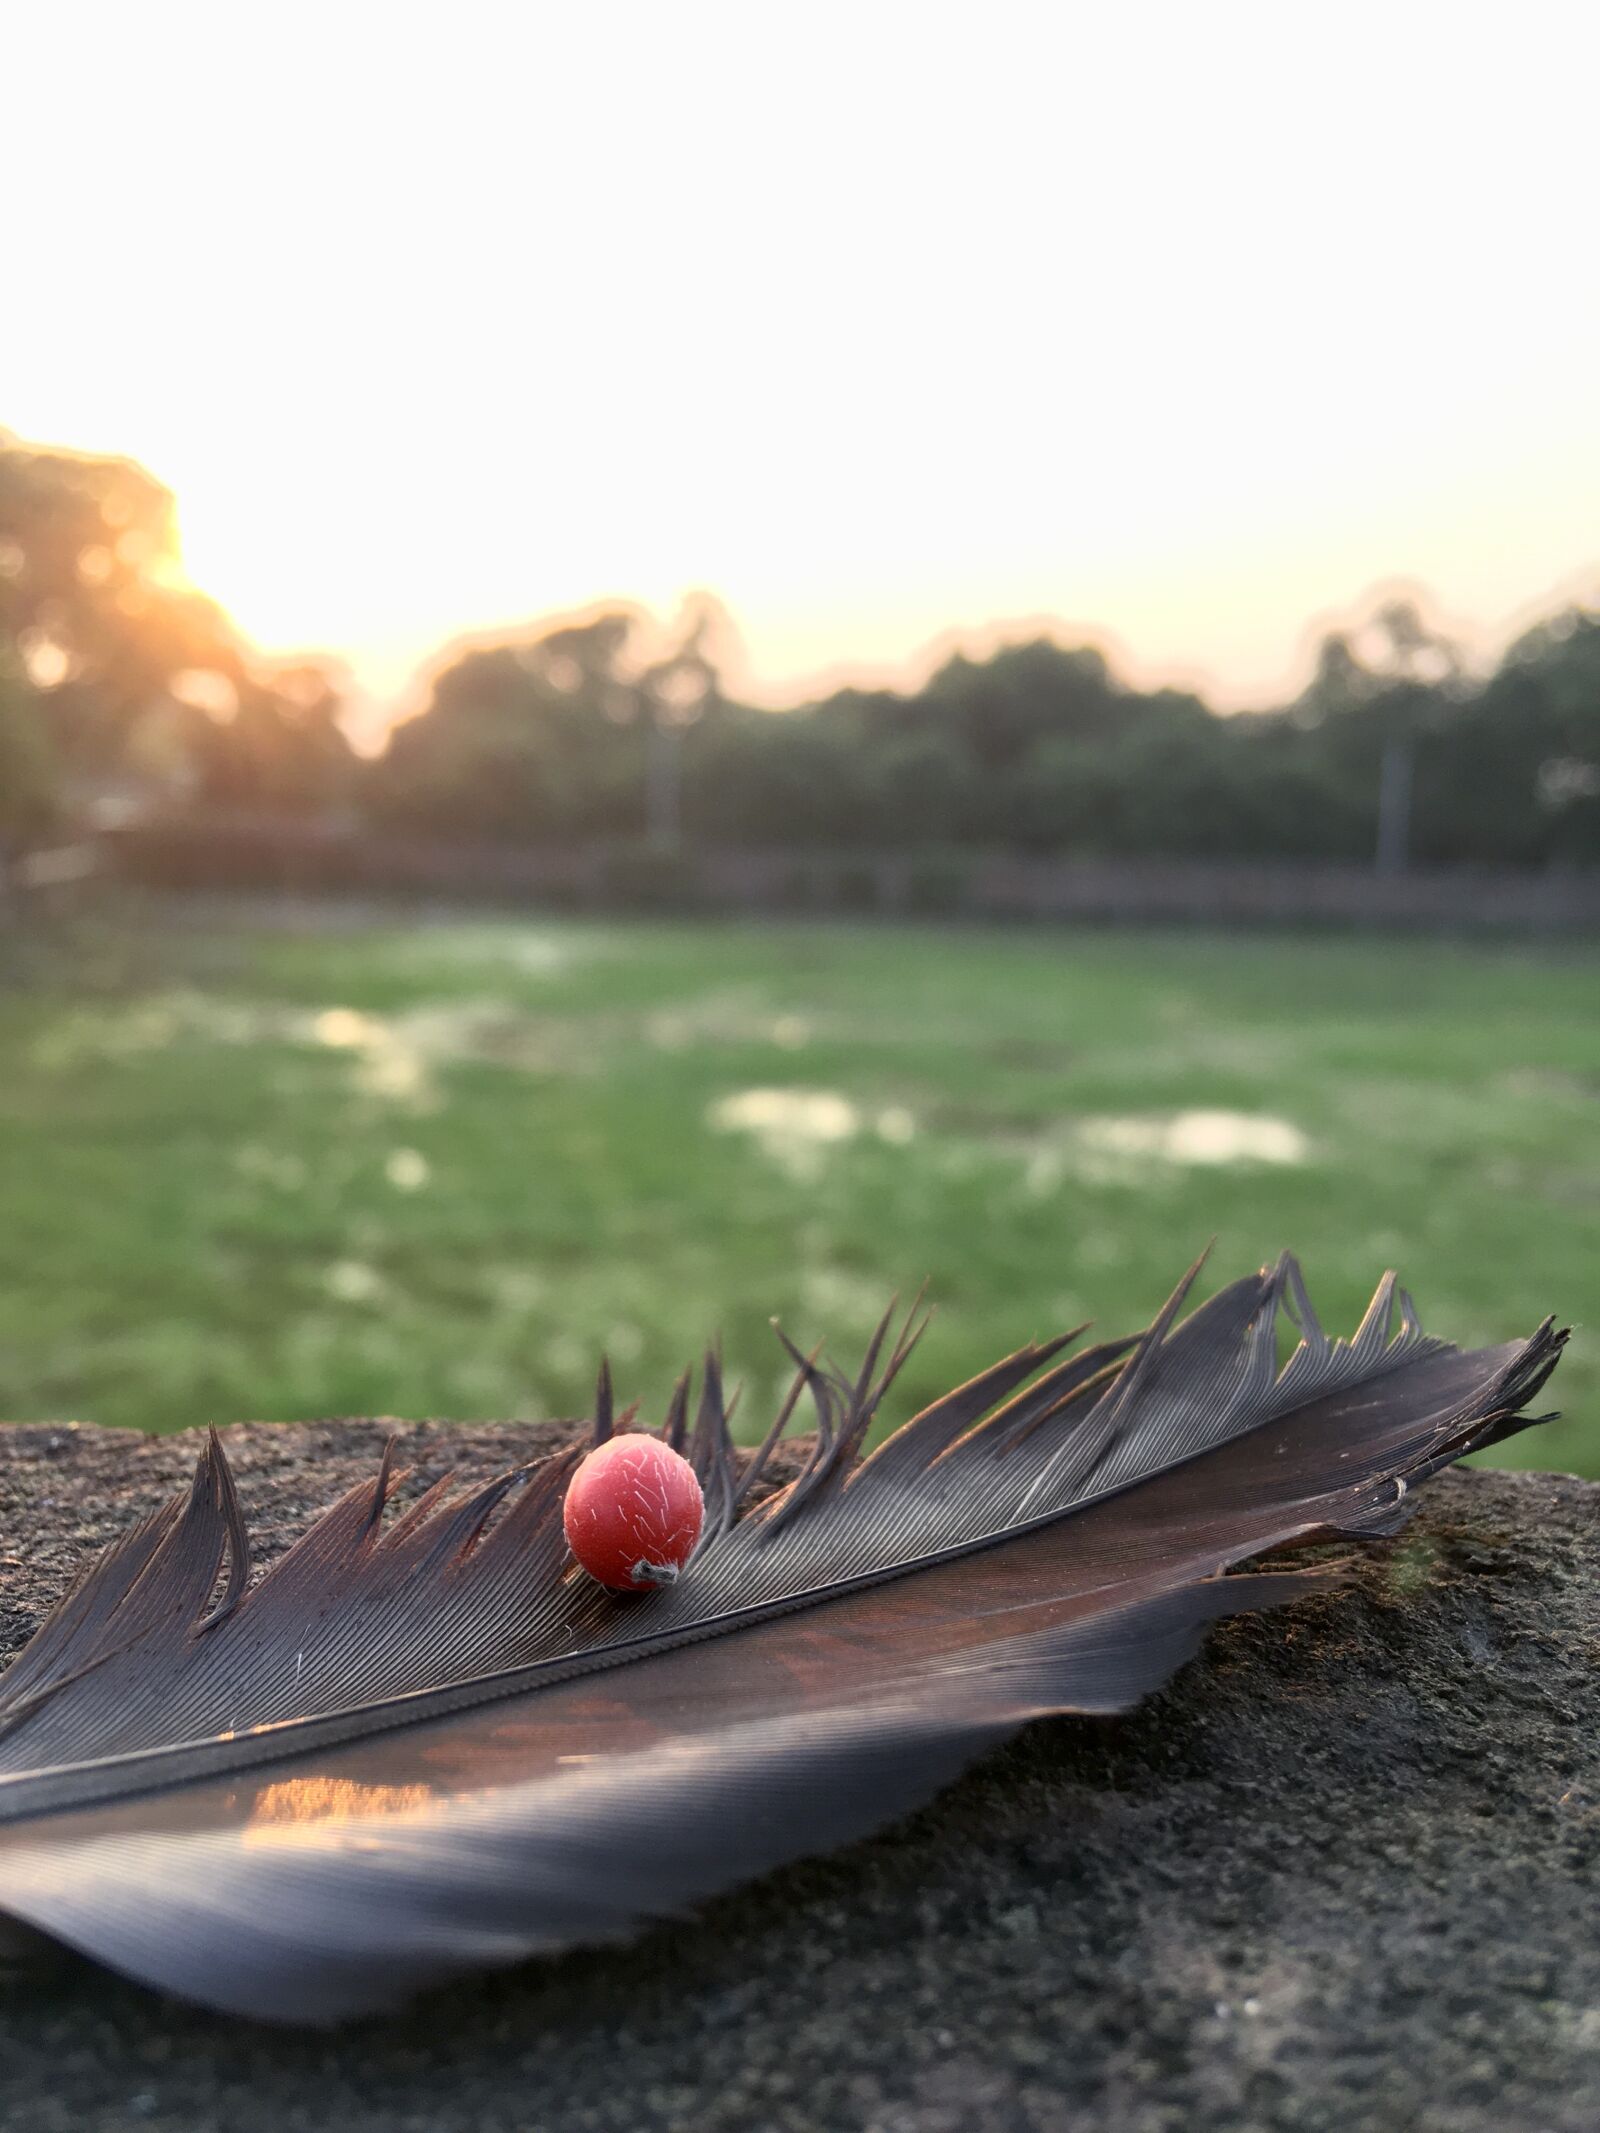 Apple iPhone SE (1st generation) sample photo. Feather, red fruit, nature photography